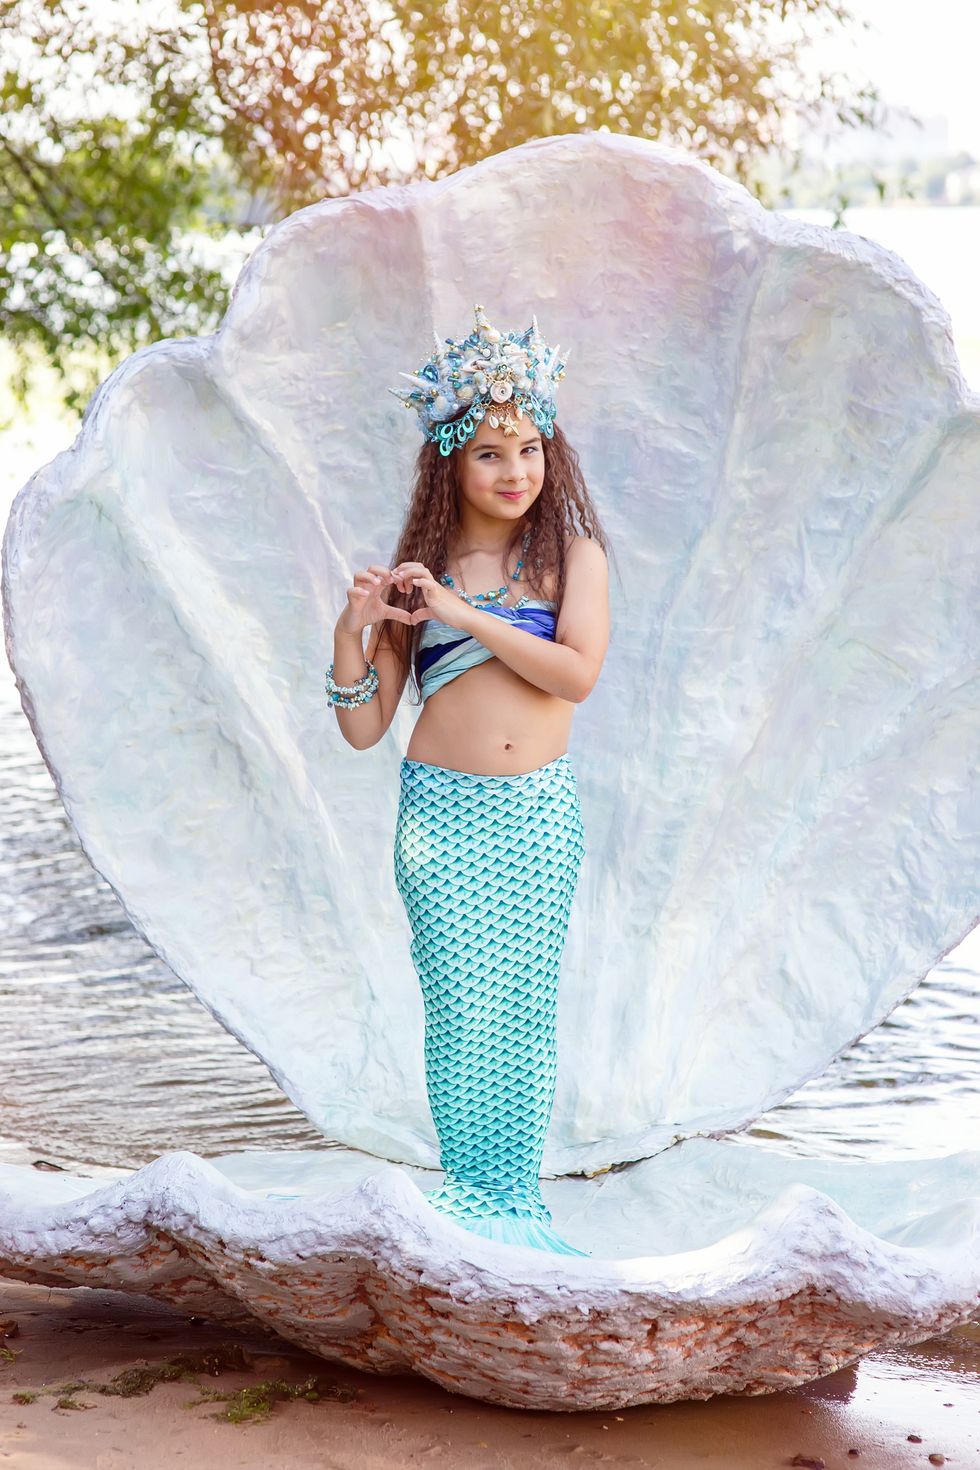 The Best Ariel Costumes to Channel Your Inner Little Mermaid for Halloween